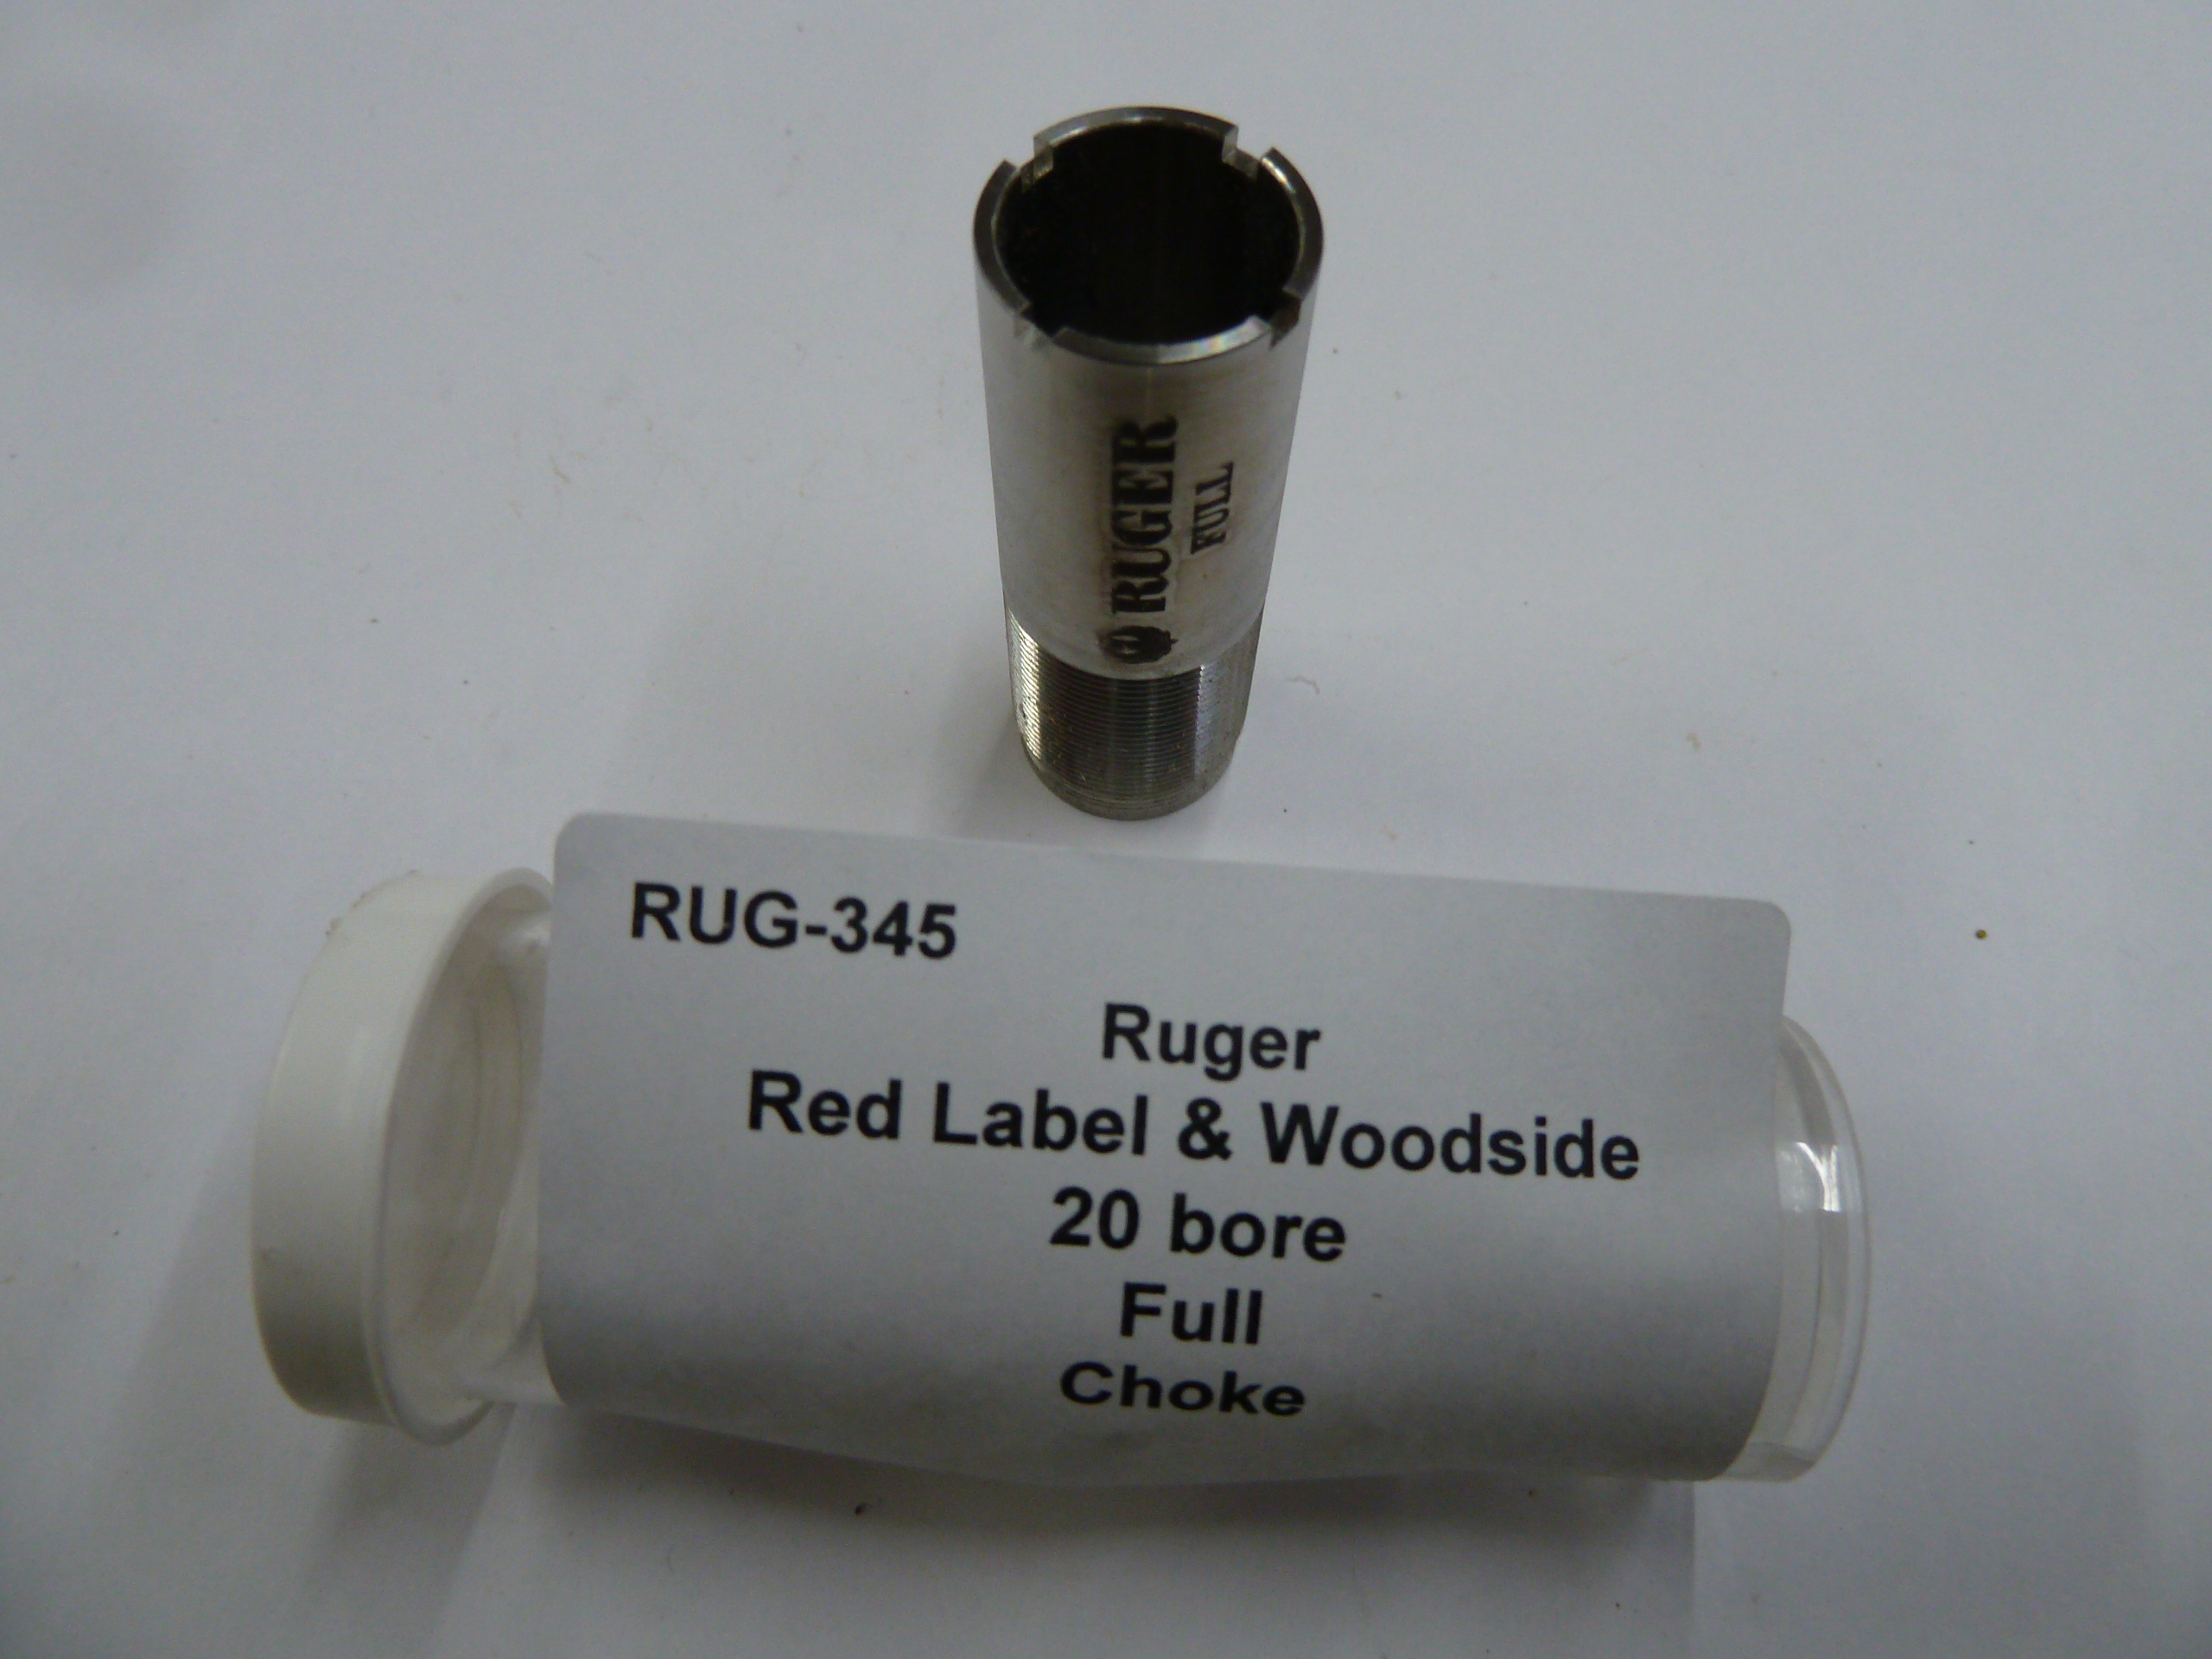 RUG-345 Ruger red label and woodside 20 bore full choke (2)